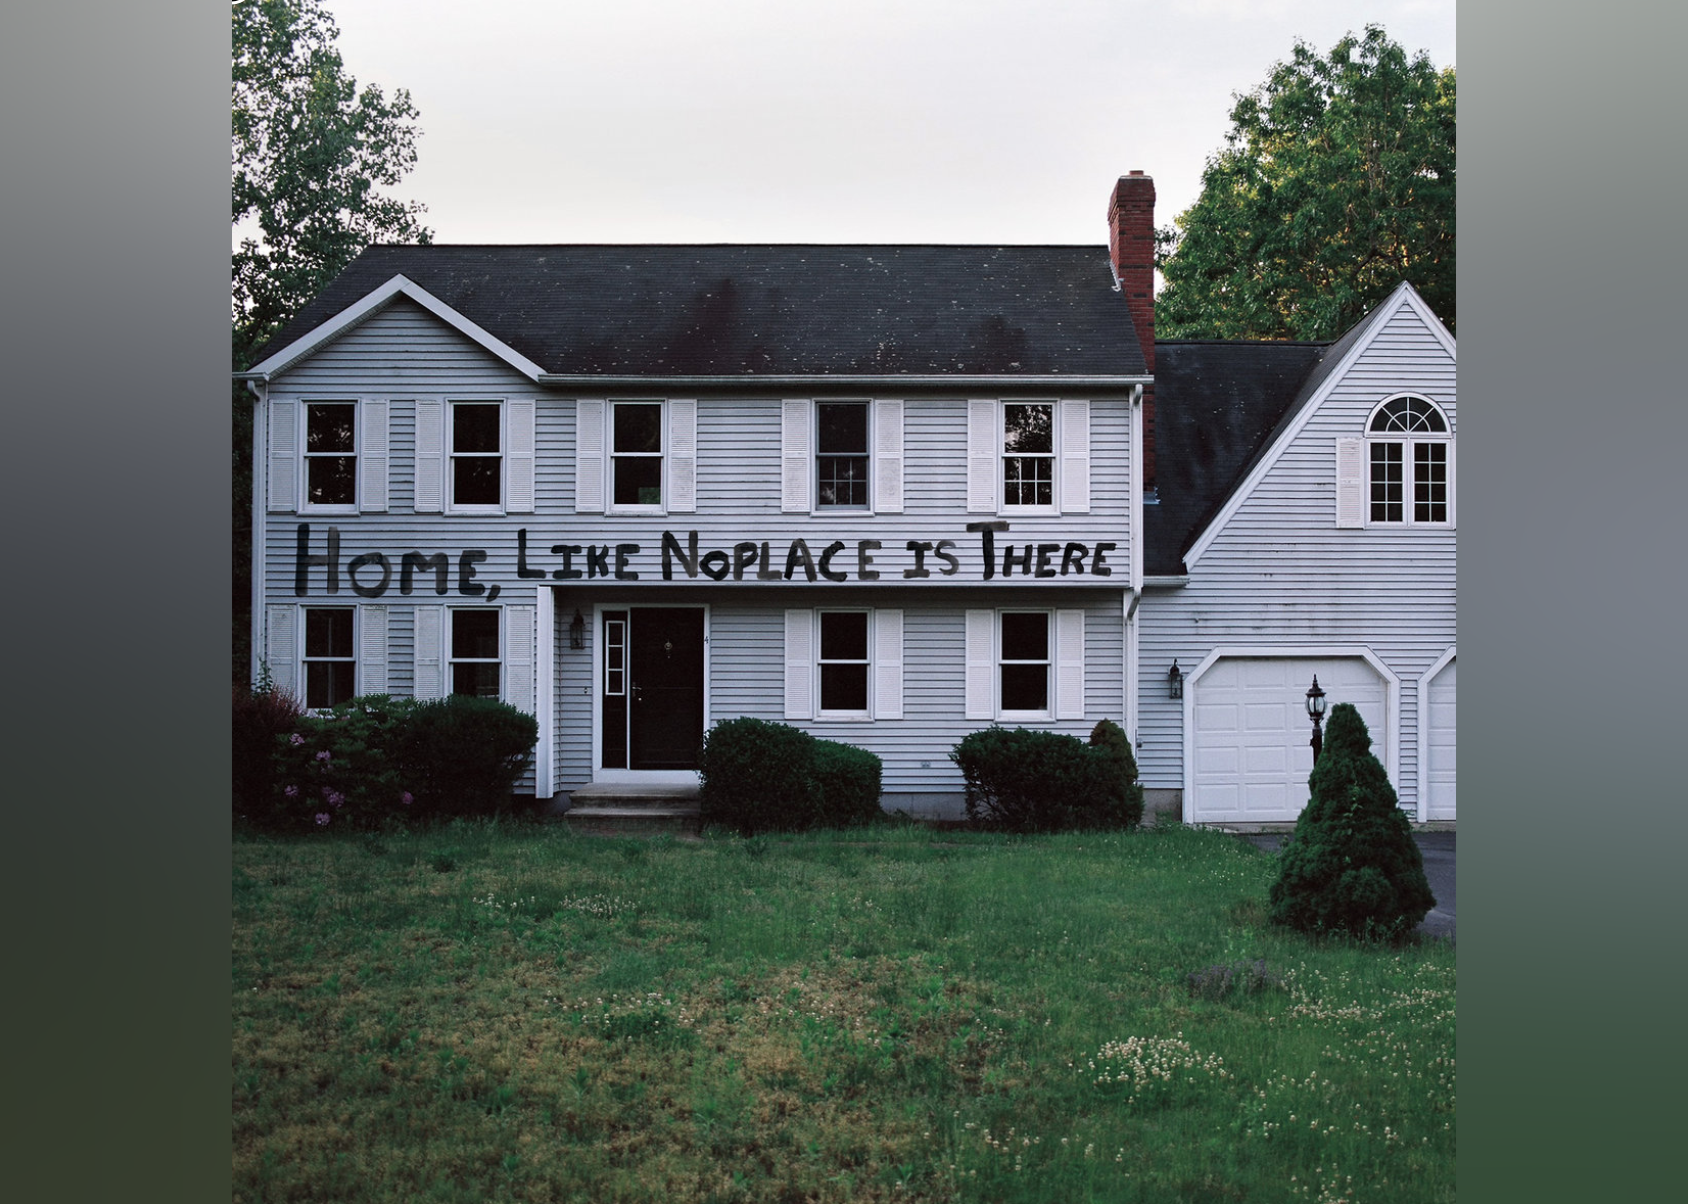 A white and grey home with the album name written across the front of the house.